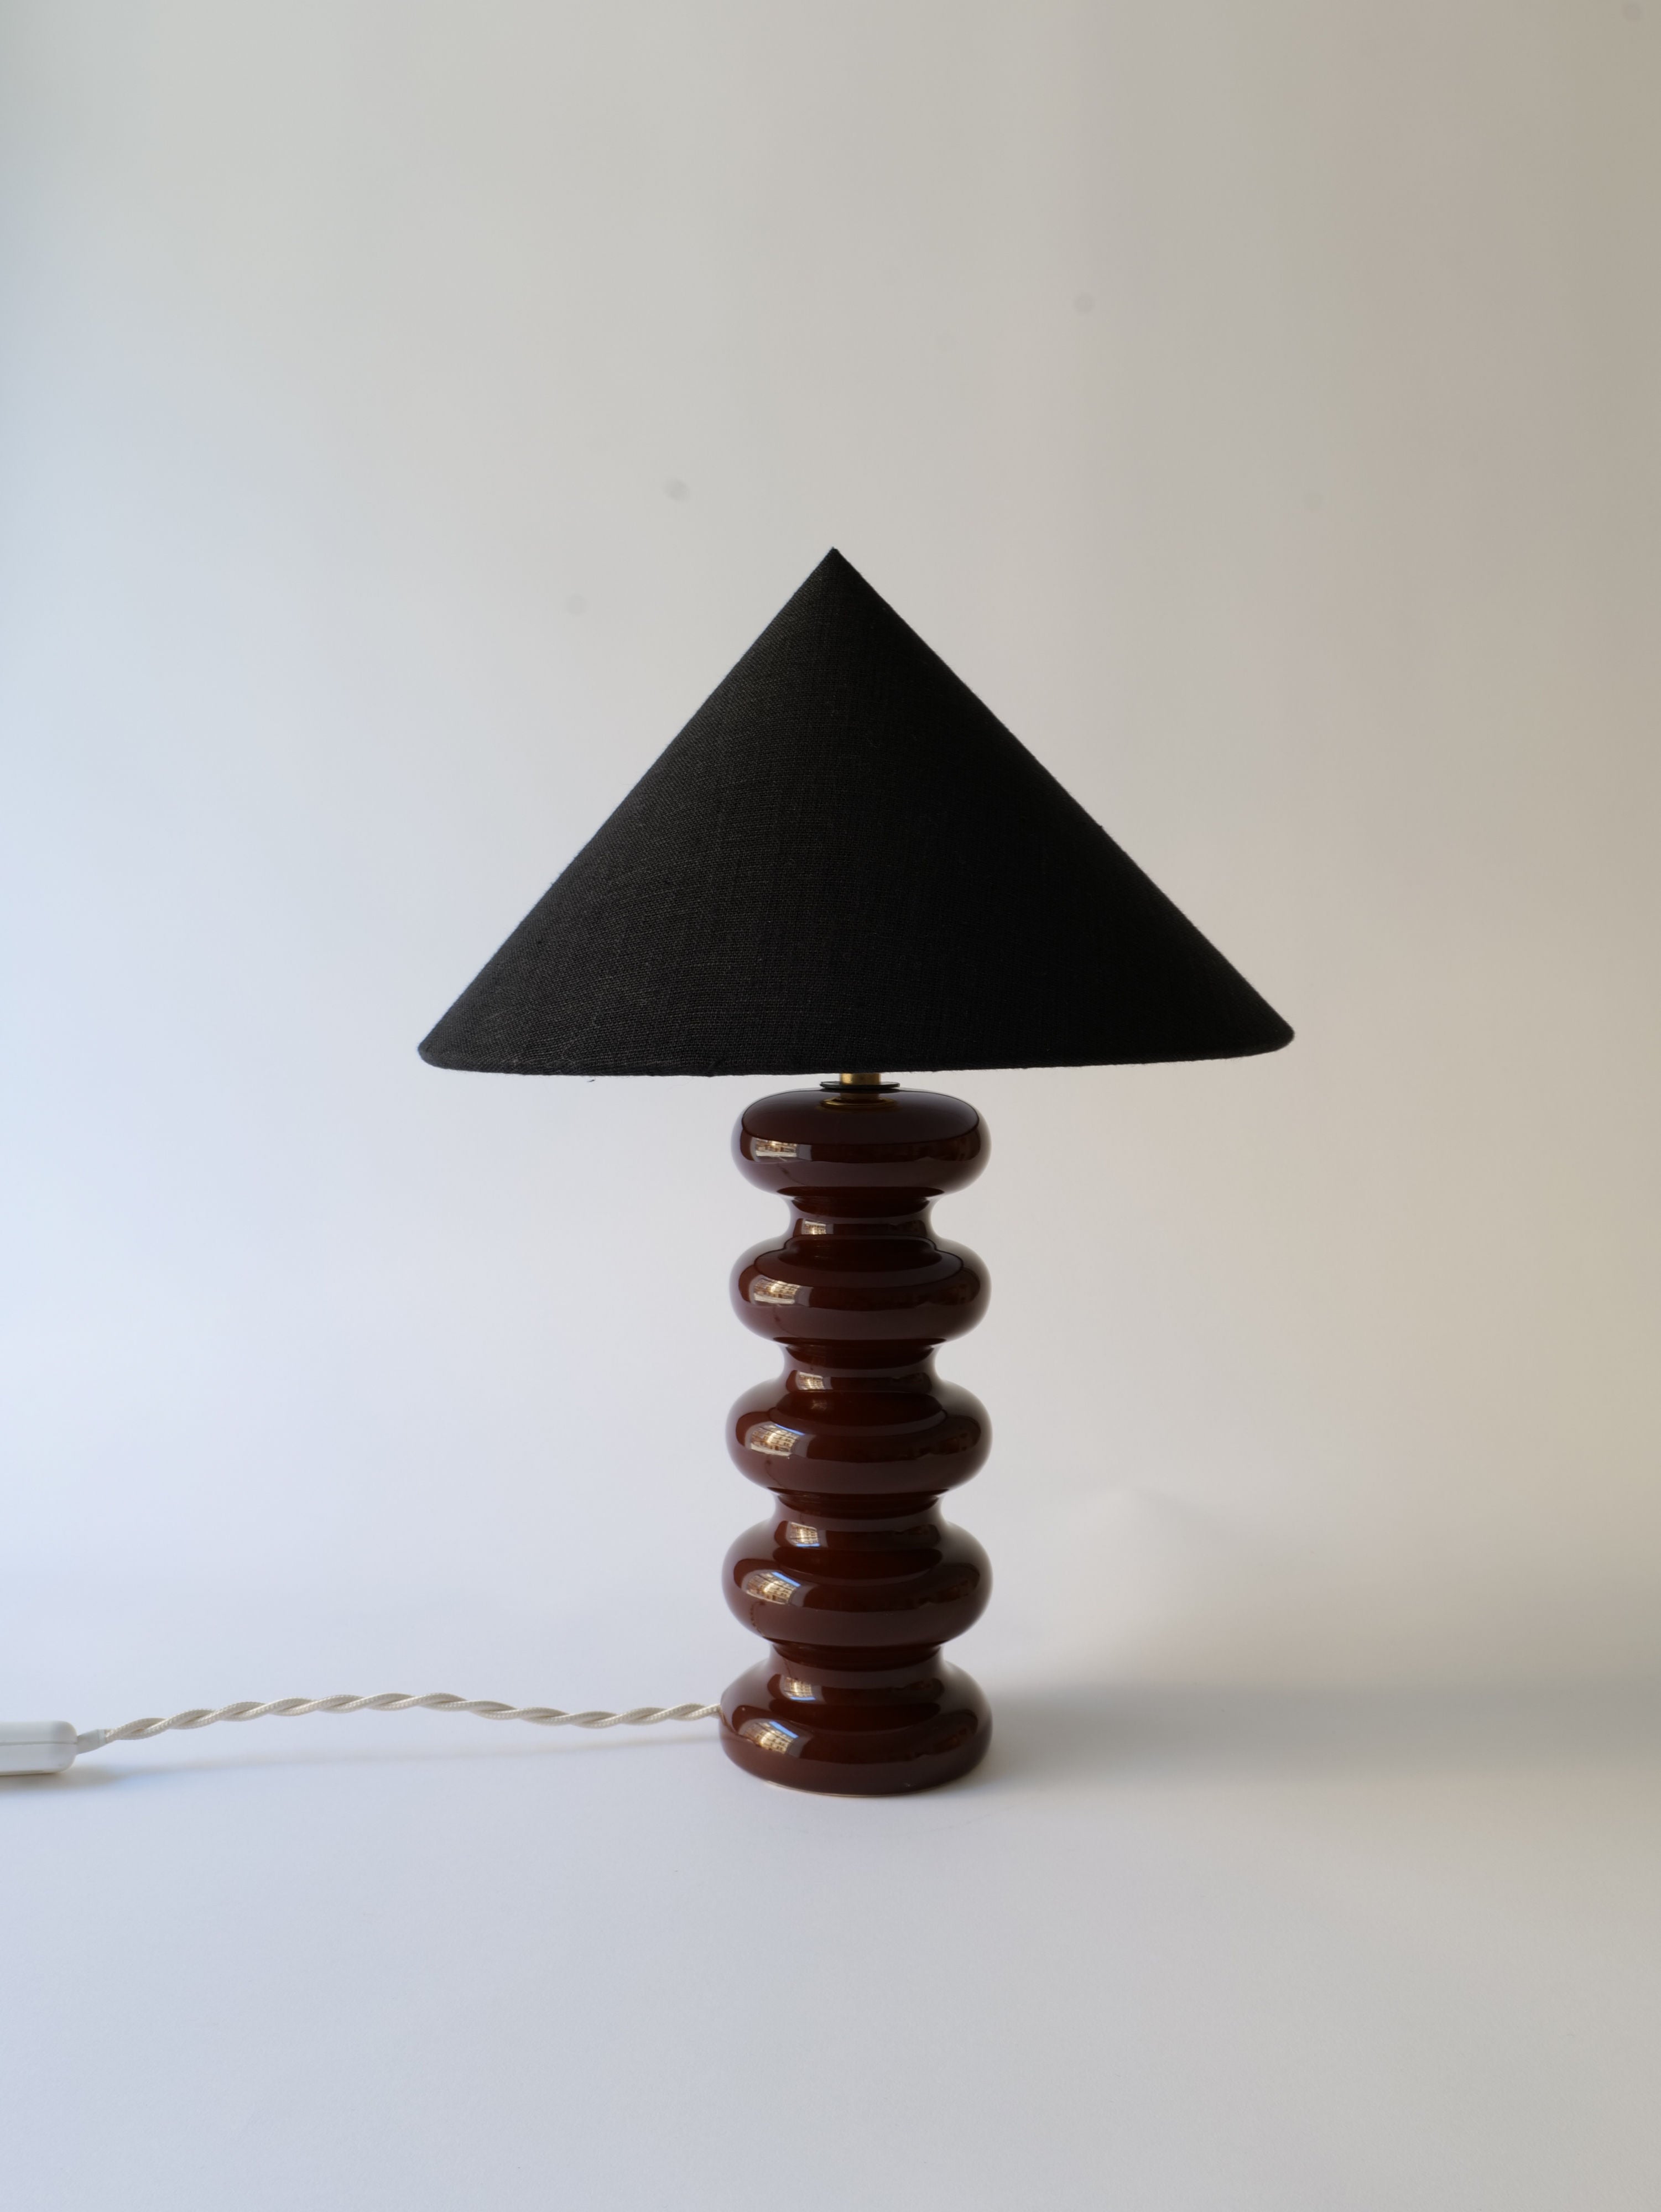 A modern Sculptural Ceramic Lamp with a triangular black shade and a base composed of stacked circular Doulton England ceramic elements, on a white background by Collection apart.